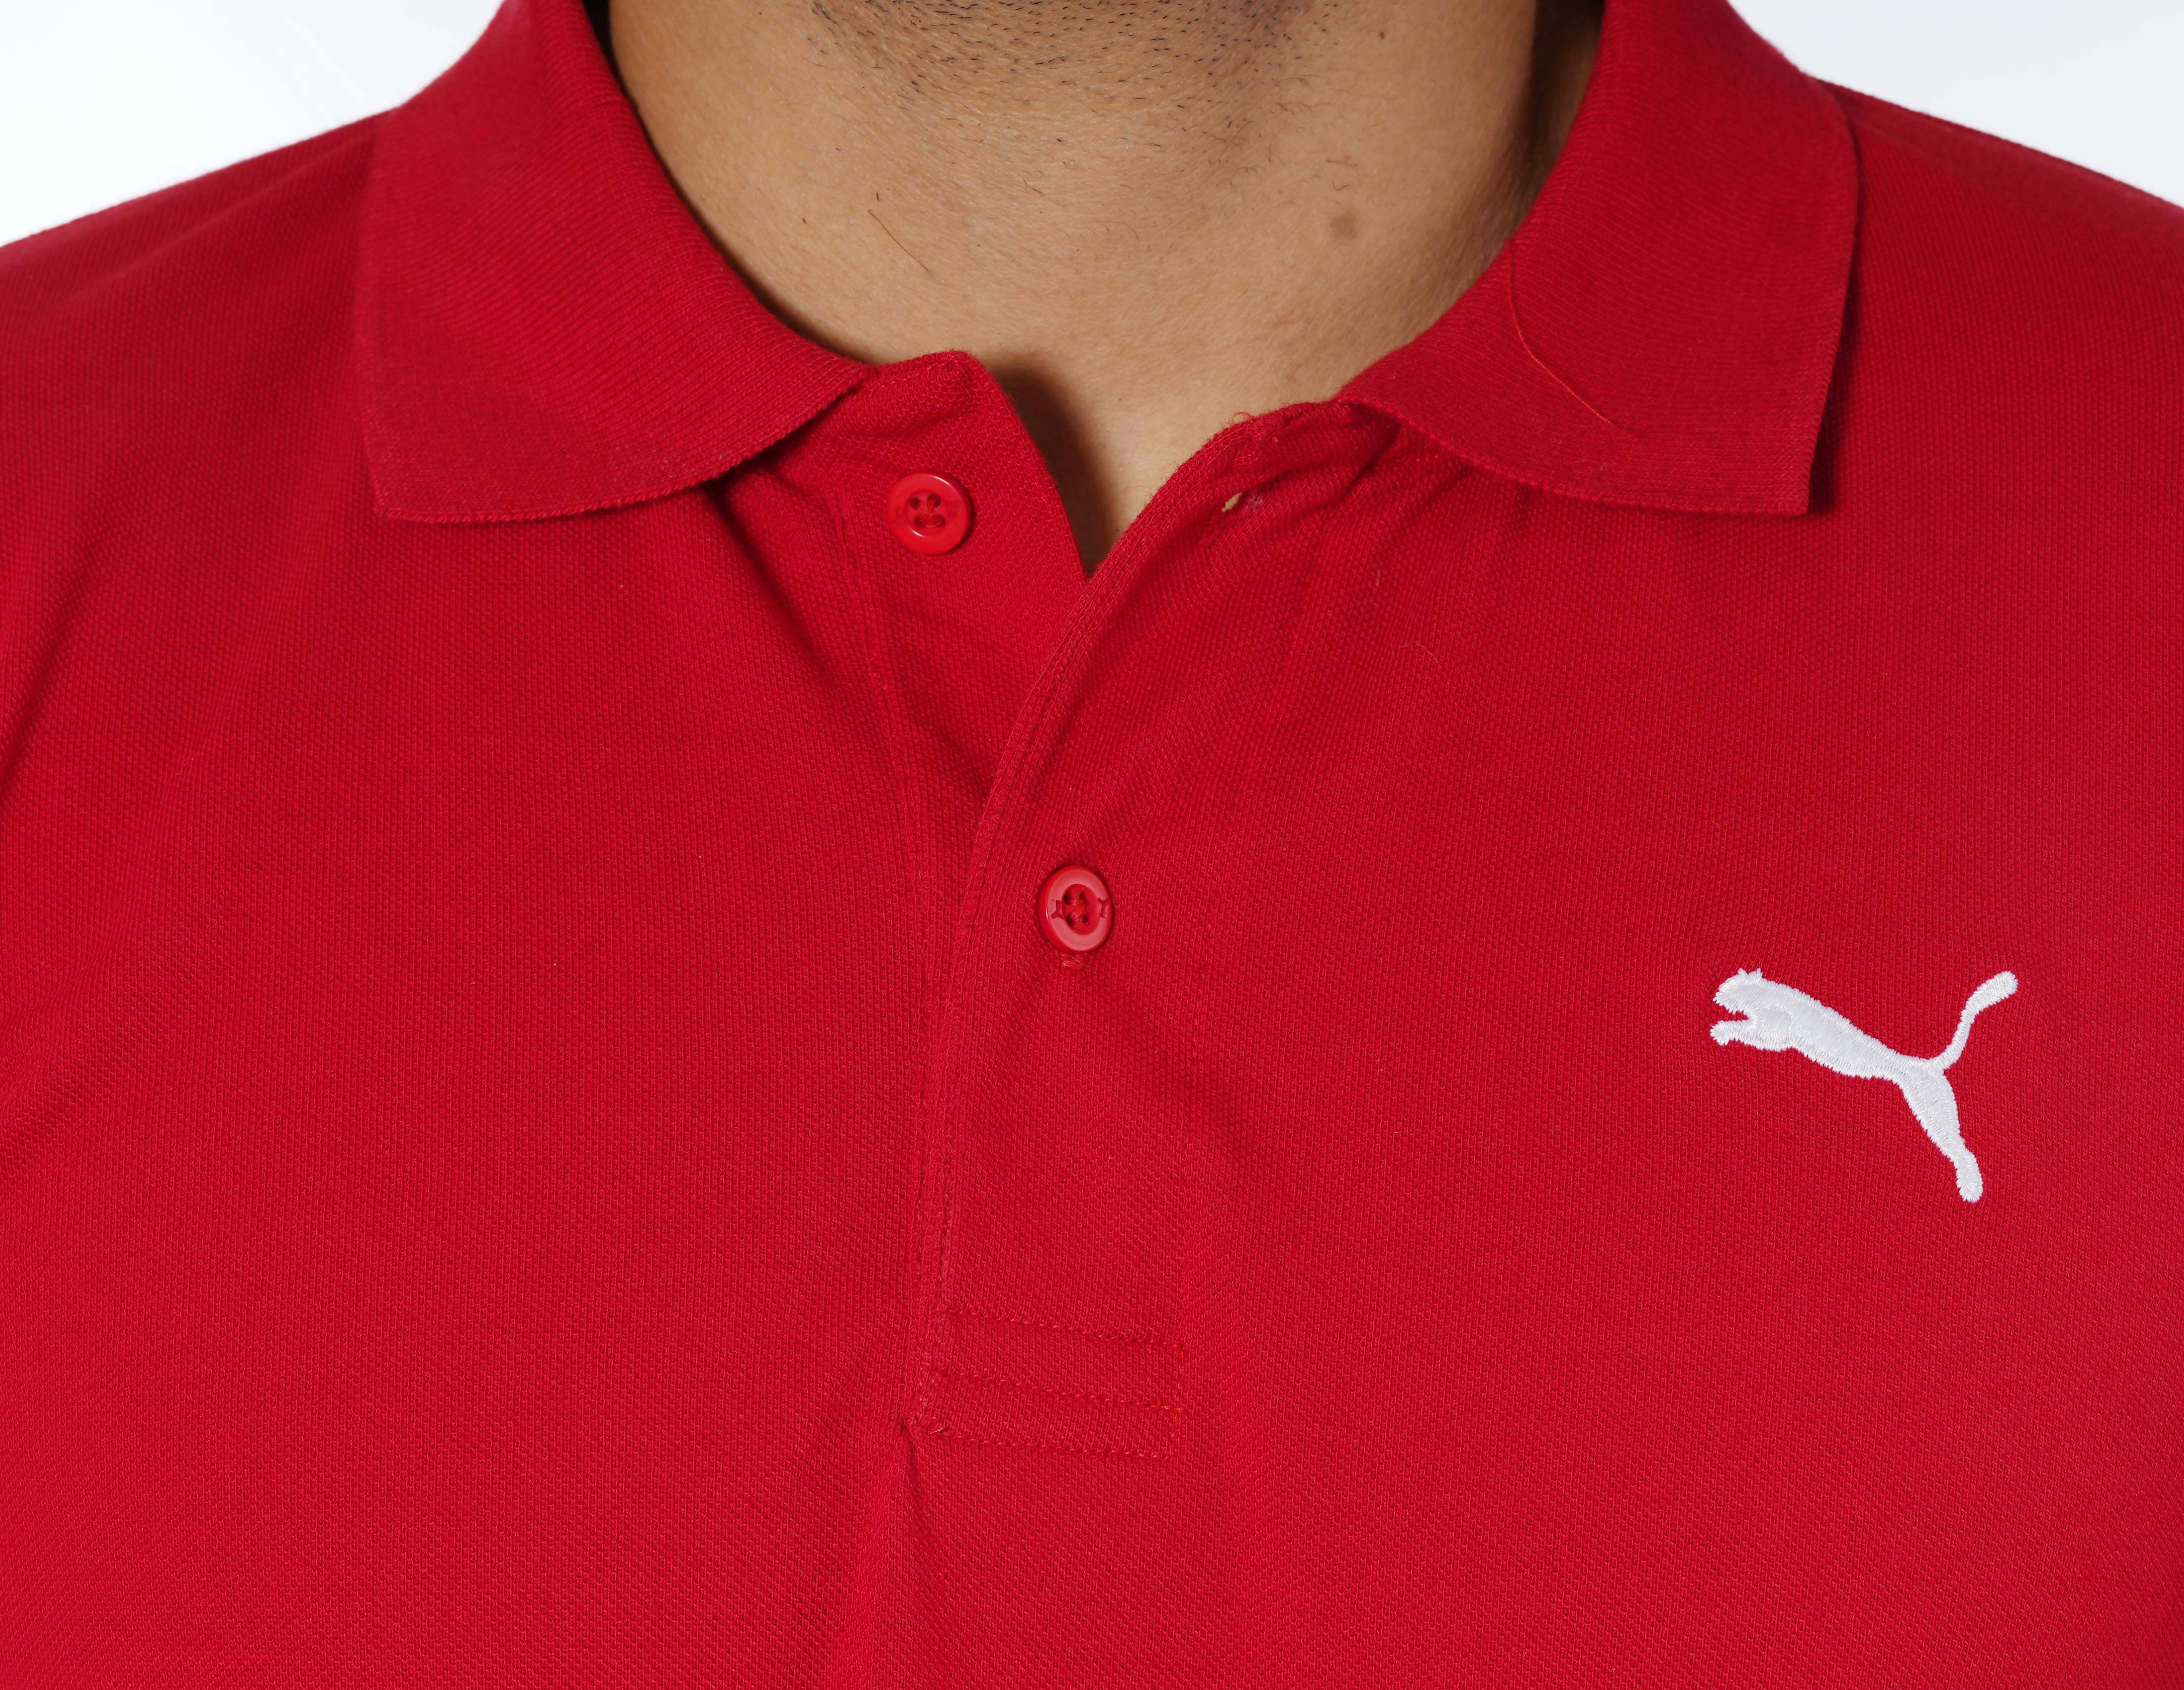 Puma Red Cotton T-Shirt - Buy Puma Red Cotton T-Shirt Online at Low ...